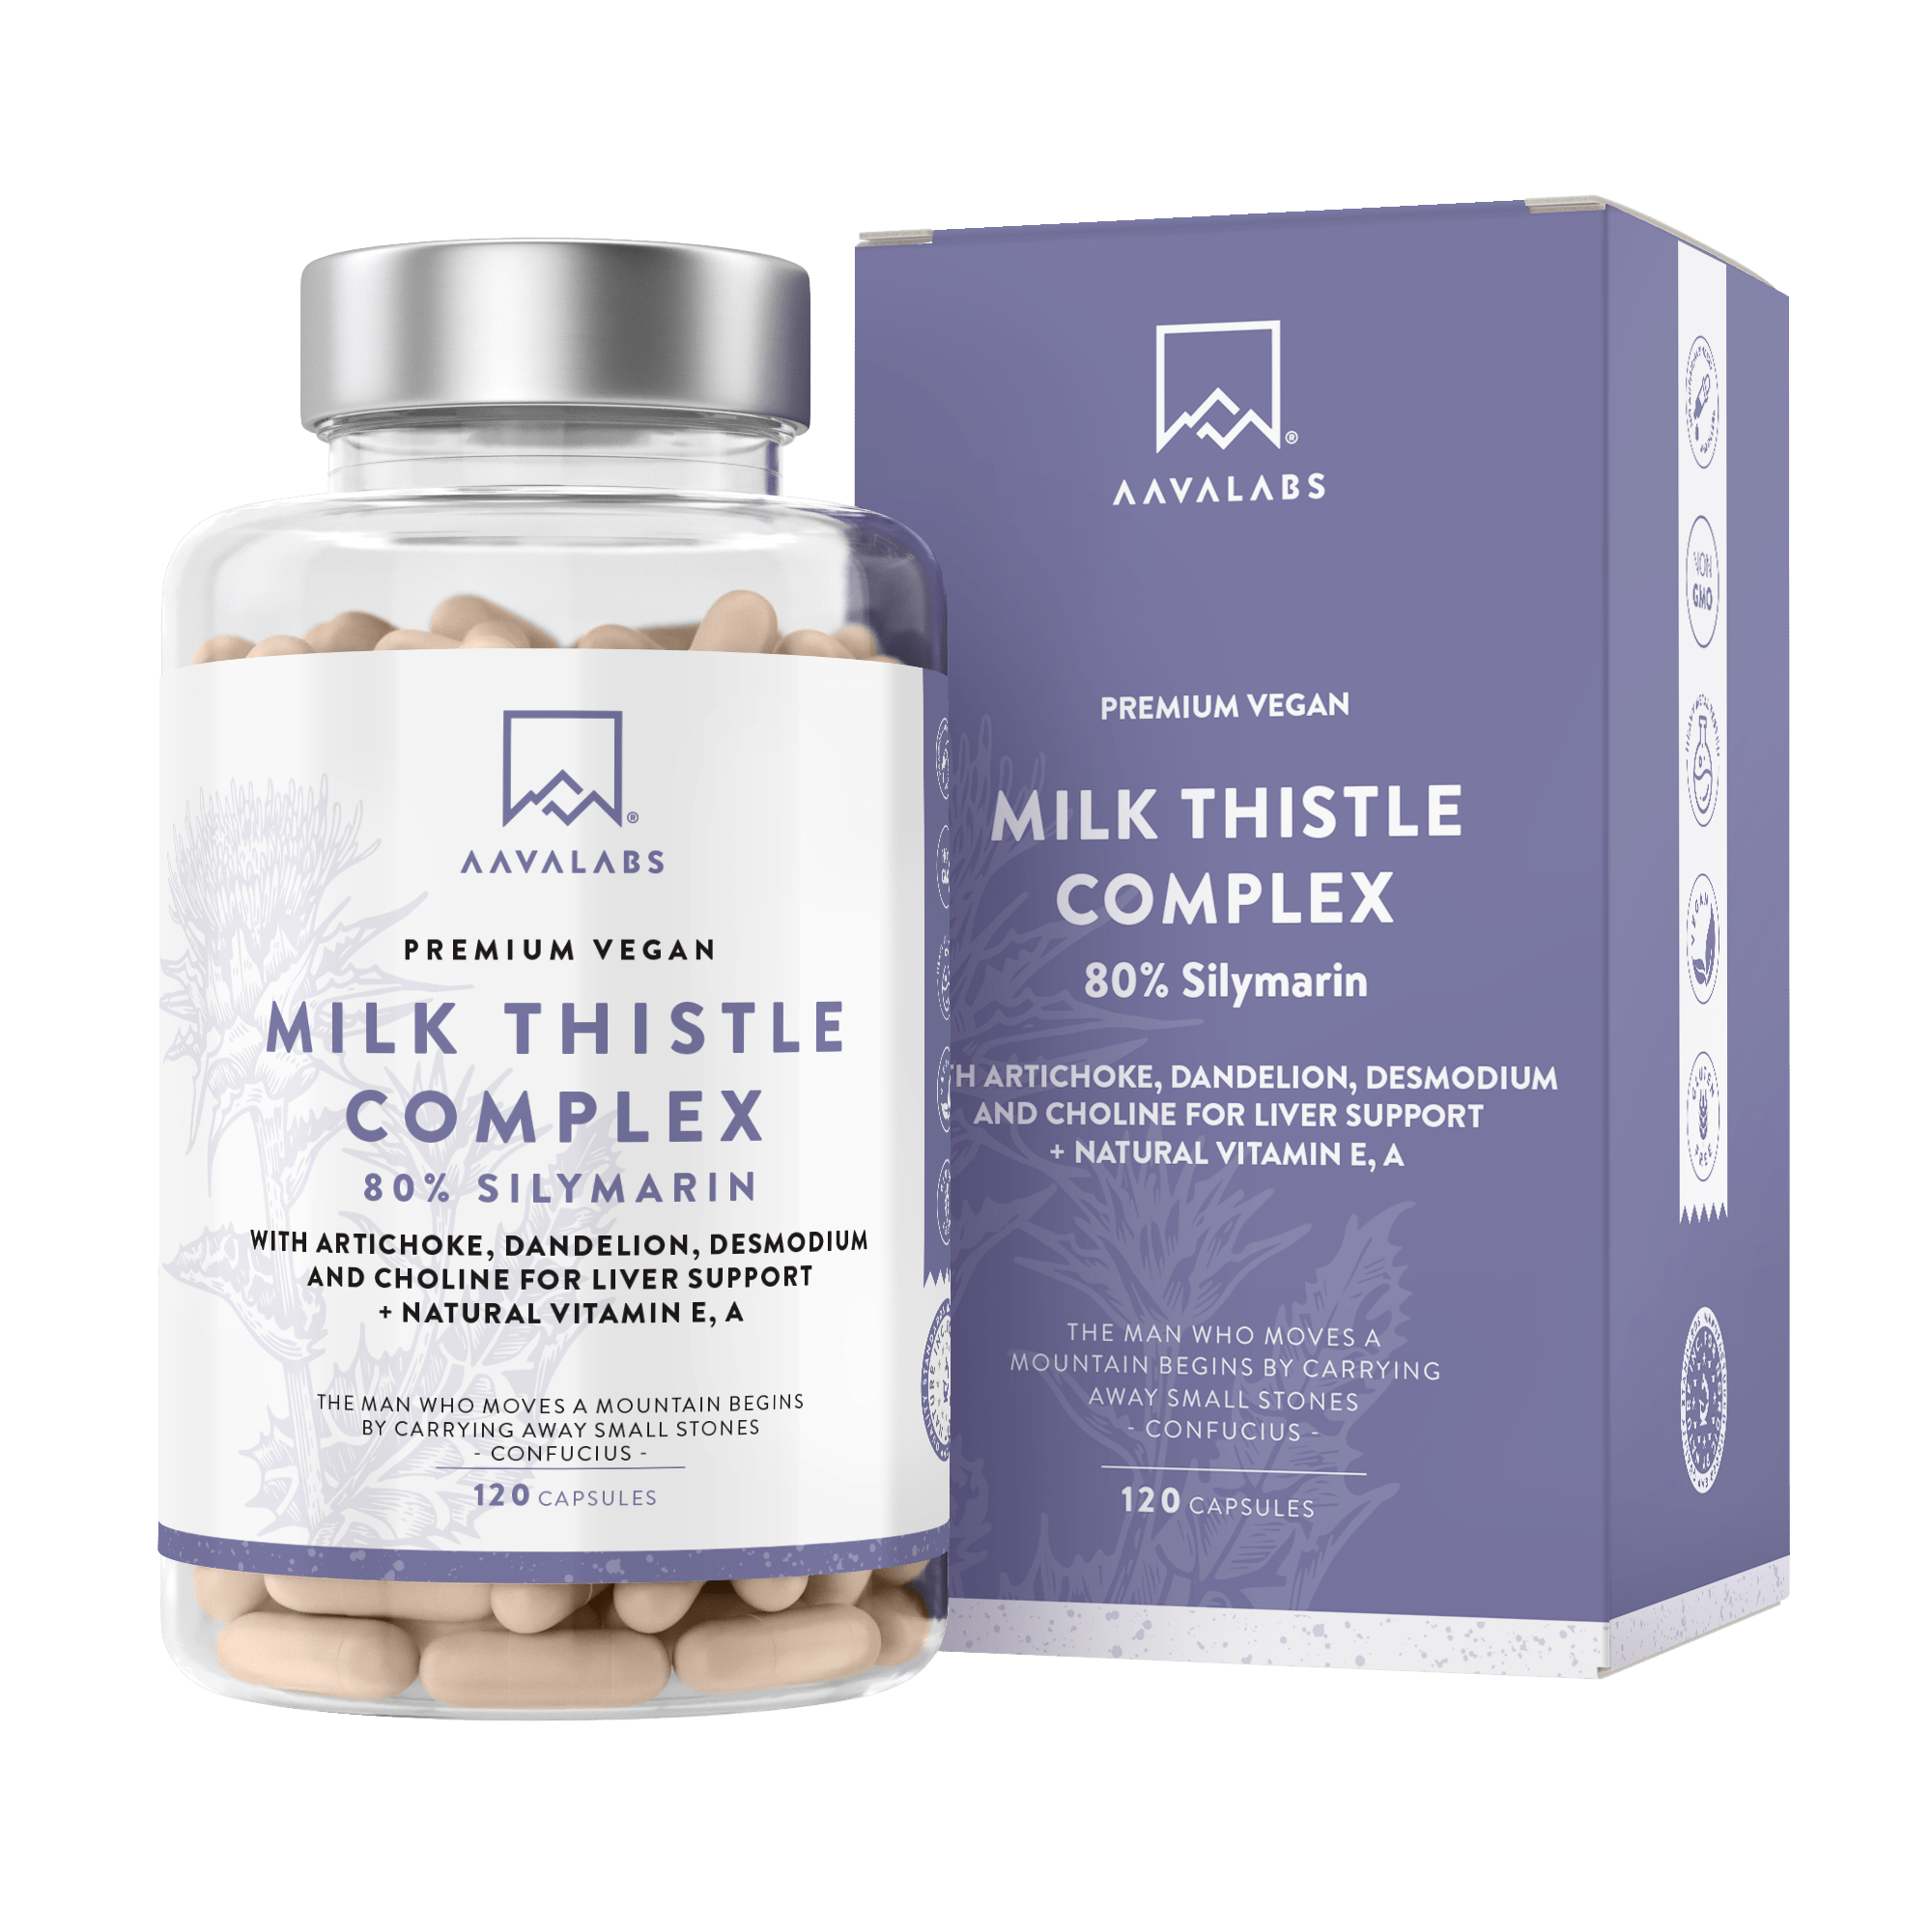 A bottle and box of Aavalabs' premium vegan Milk Thistle Complex - AAVALABS